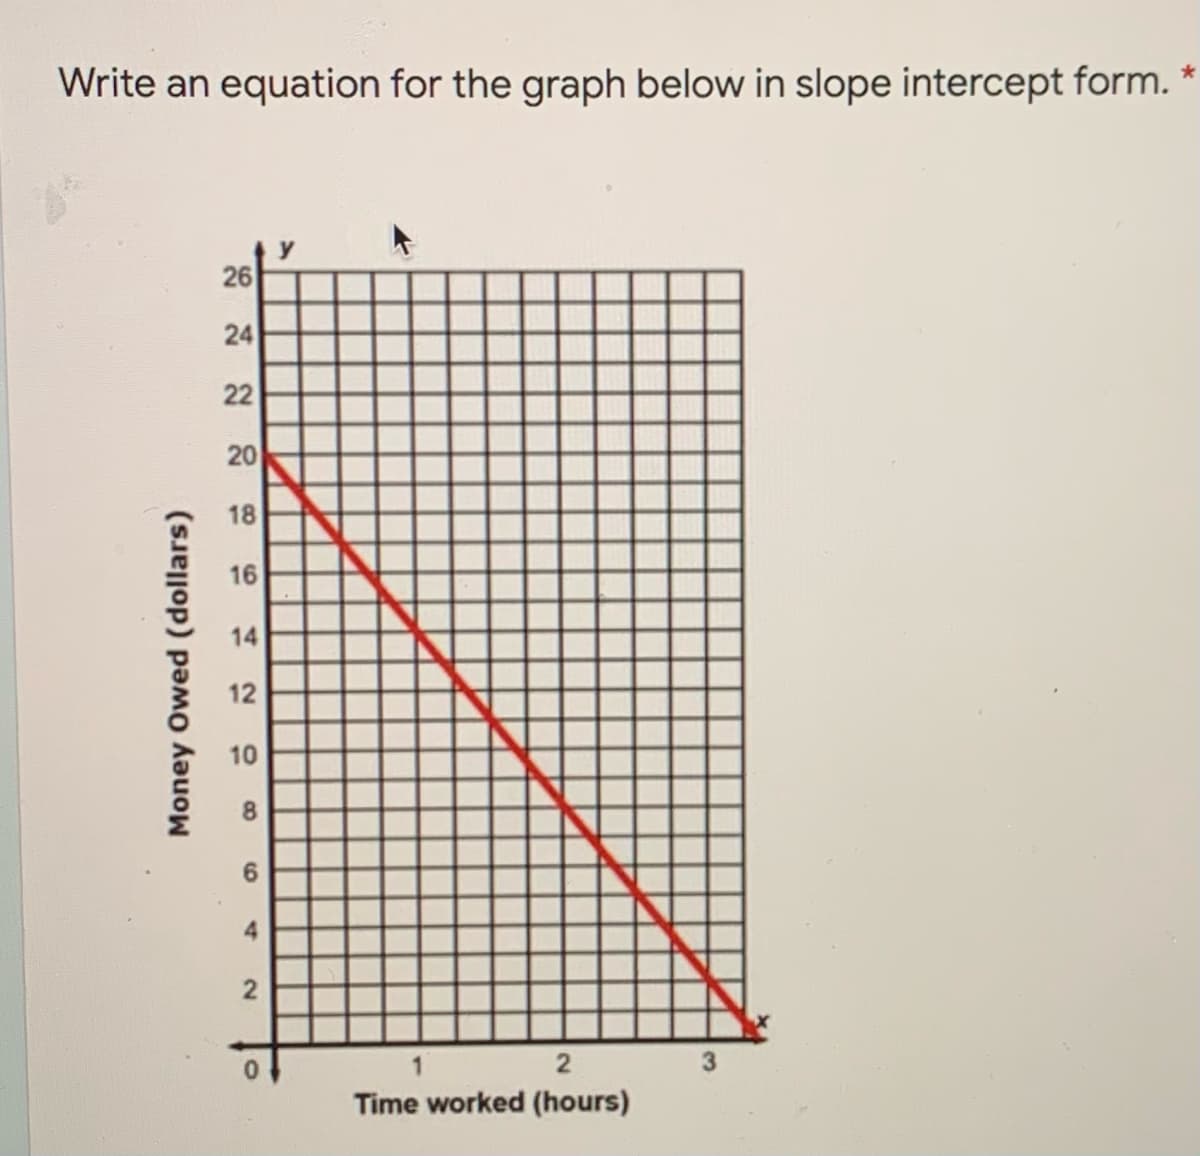 Write an equation for the graph below in slope intercept form. *
26
24
22
20
18
16
14
12
10
8.
6.
4
Time worked (hours)
Money Owed (dollars)
